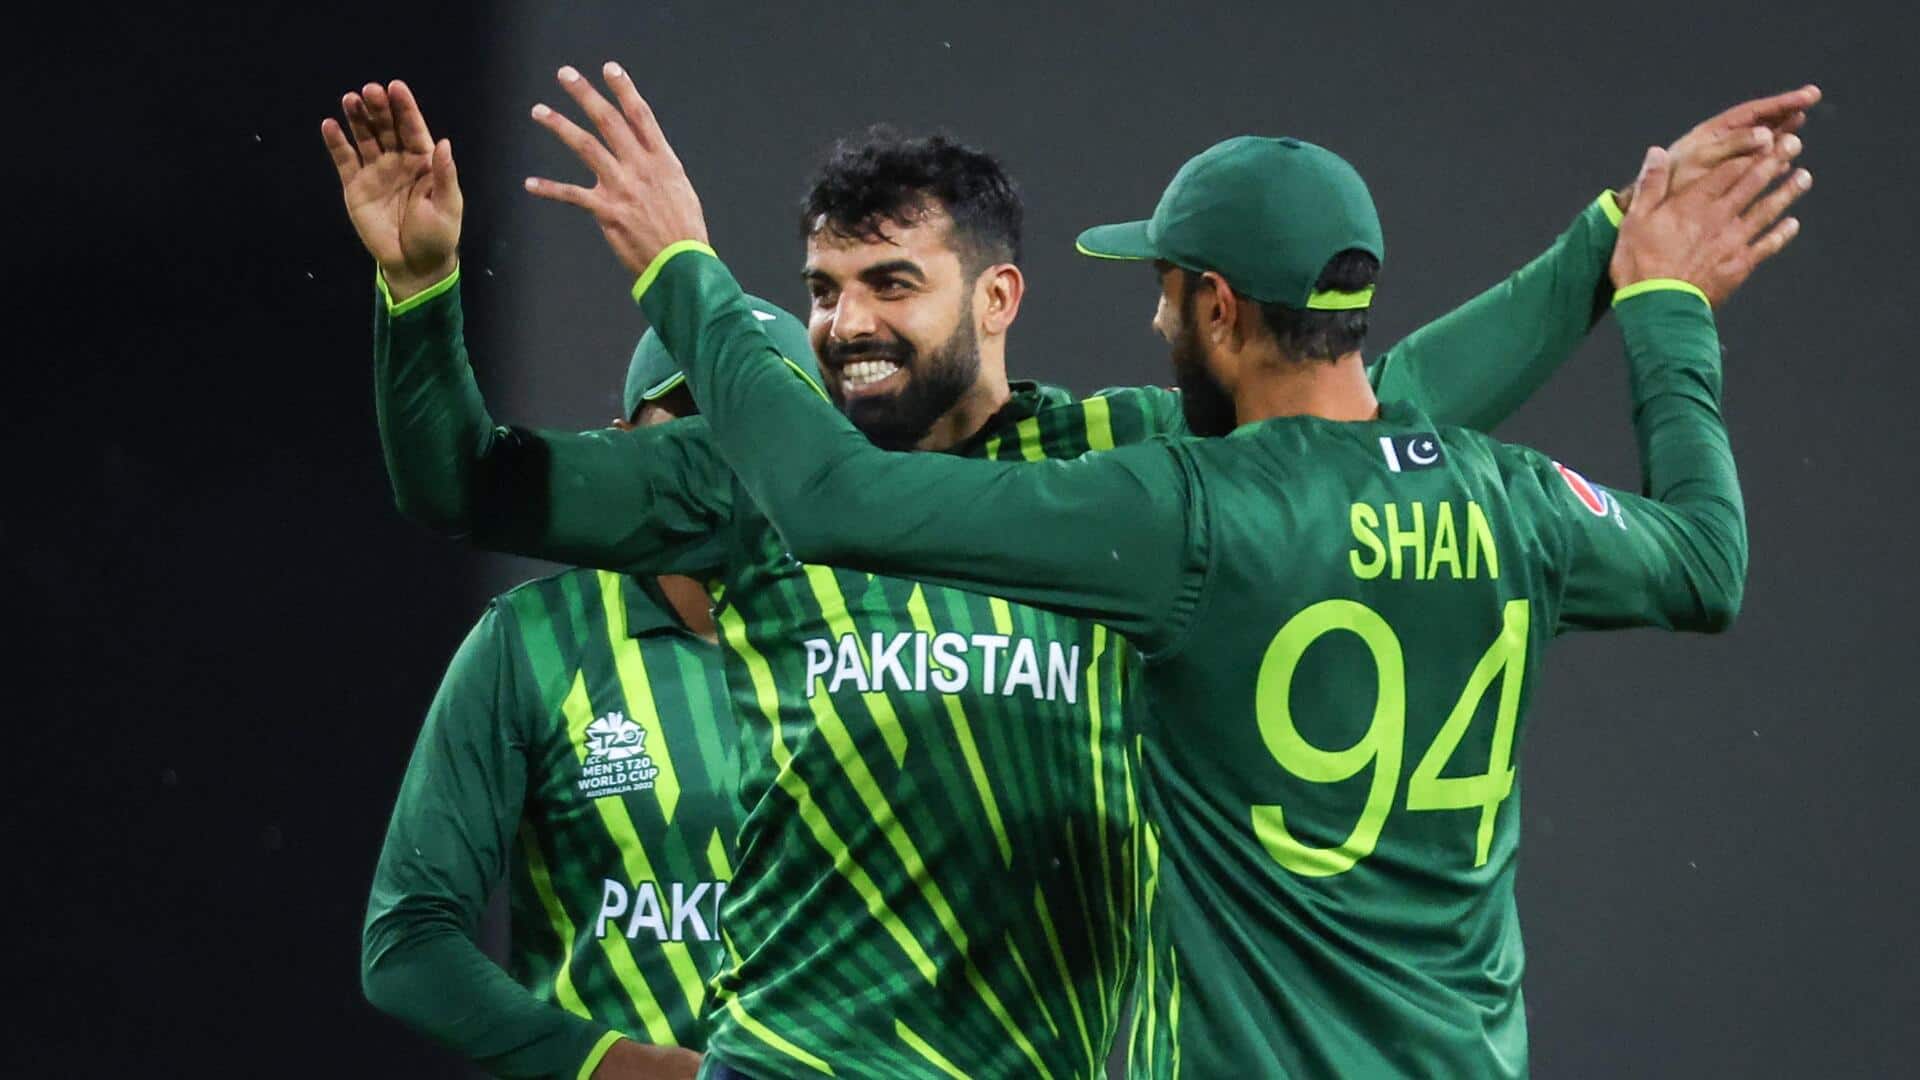 3rd ODI: Pakistan's Shadab Khan shines with 3/42 against Afghanistan